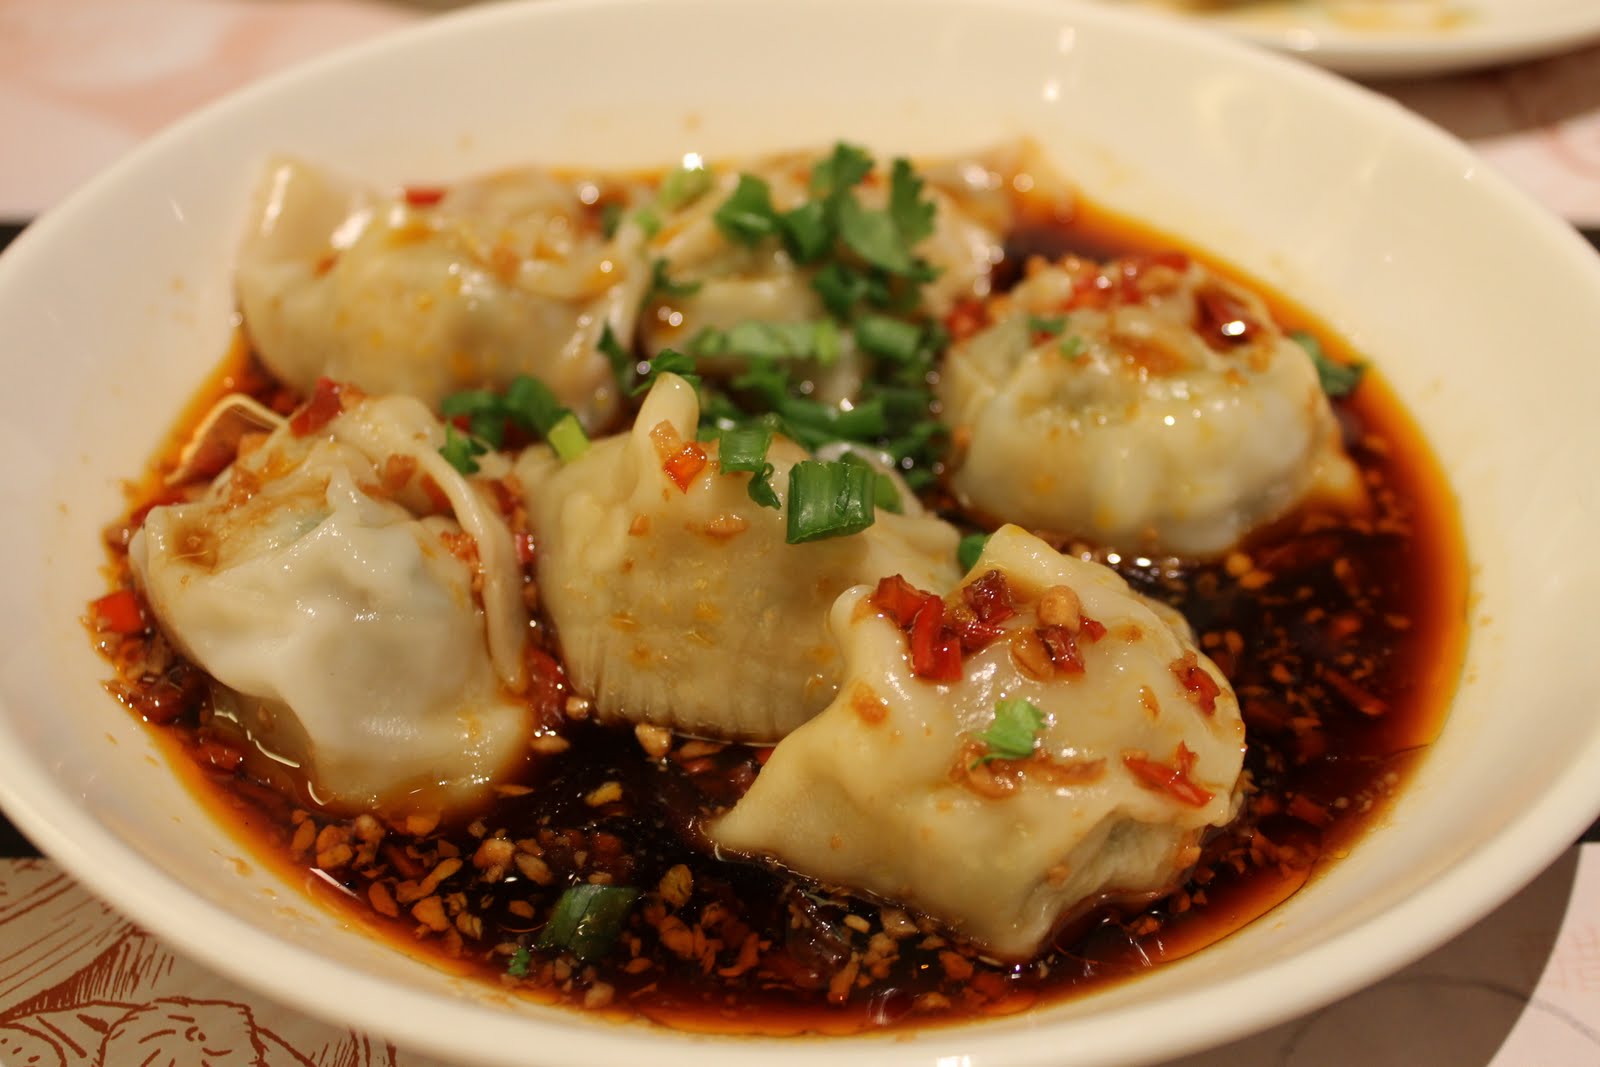 1. Wontons in Chili Oil